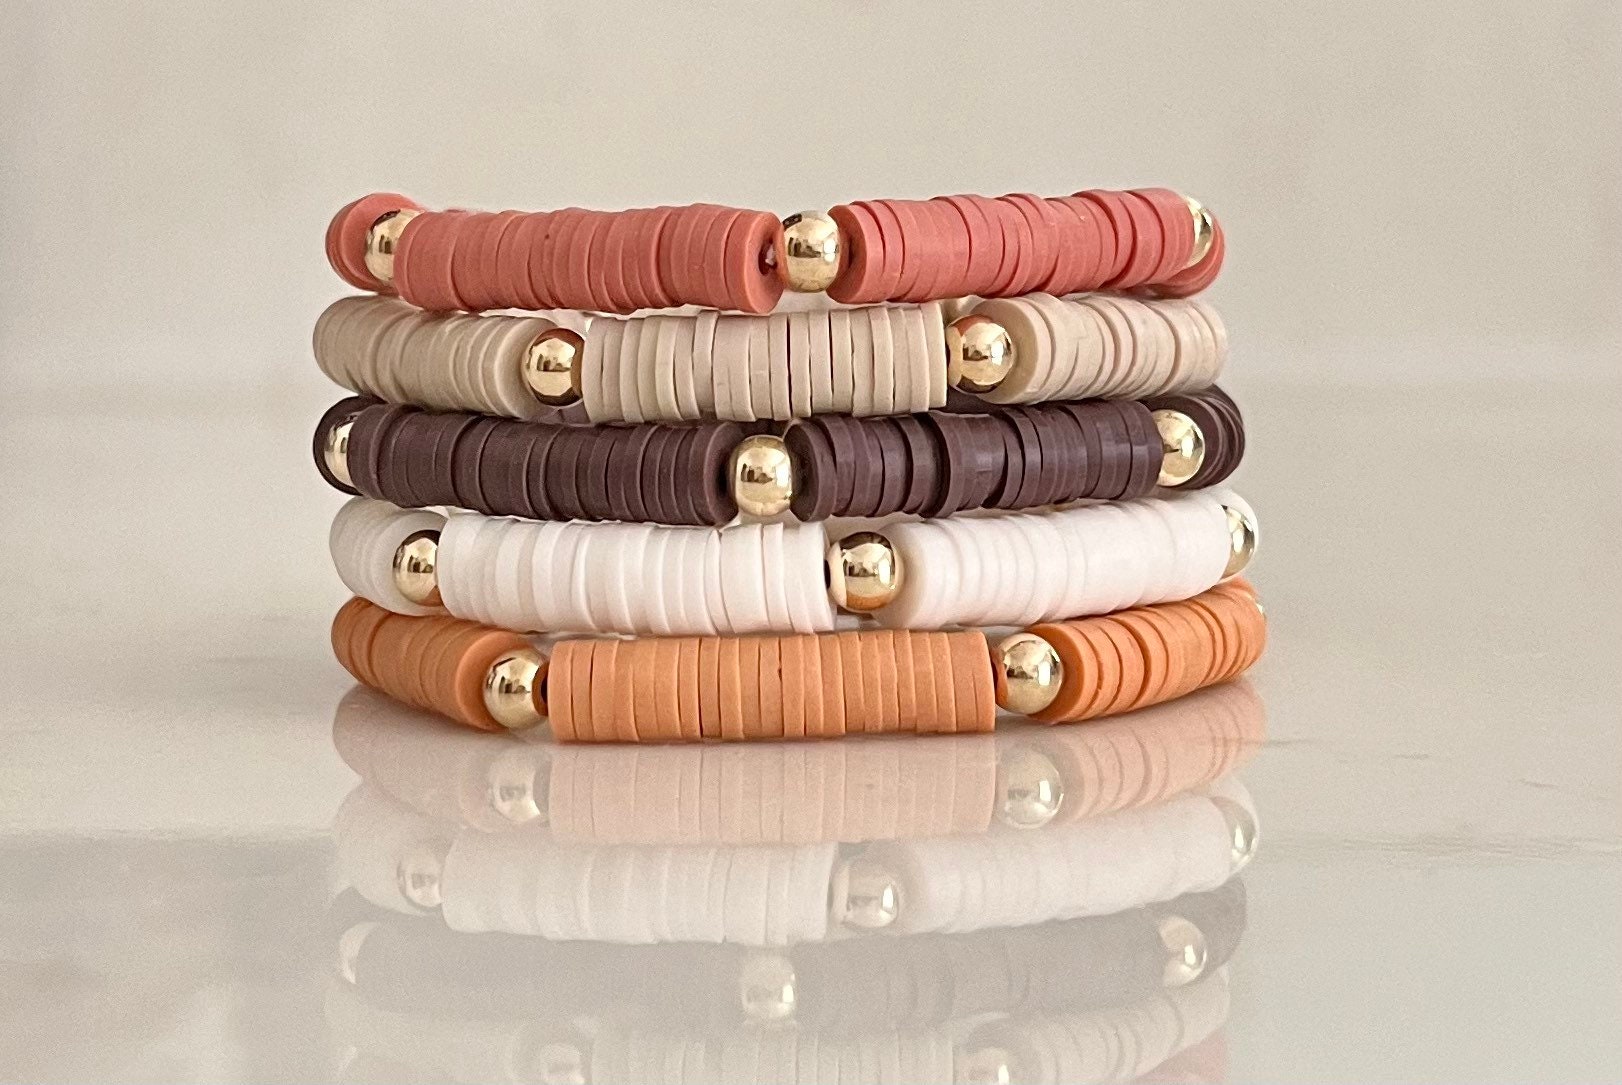 NBEADS 4pcs 4 Styles Polymer Clay Heishi Beads Stretch Bracelets Sets, Stackable Bracelets, with 304 Stainless Steel Spacer Beads and Brass